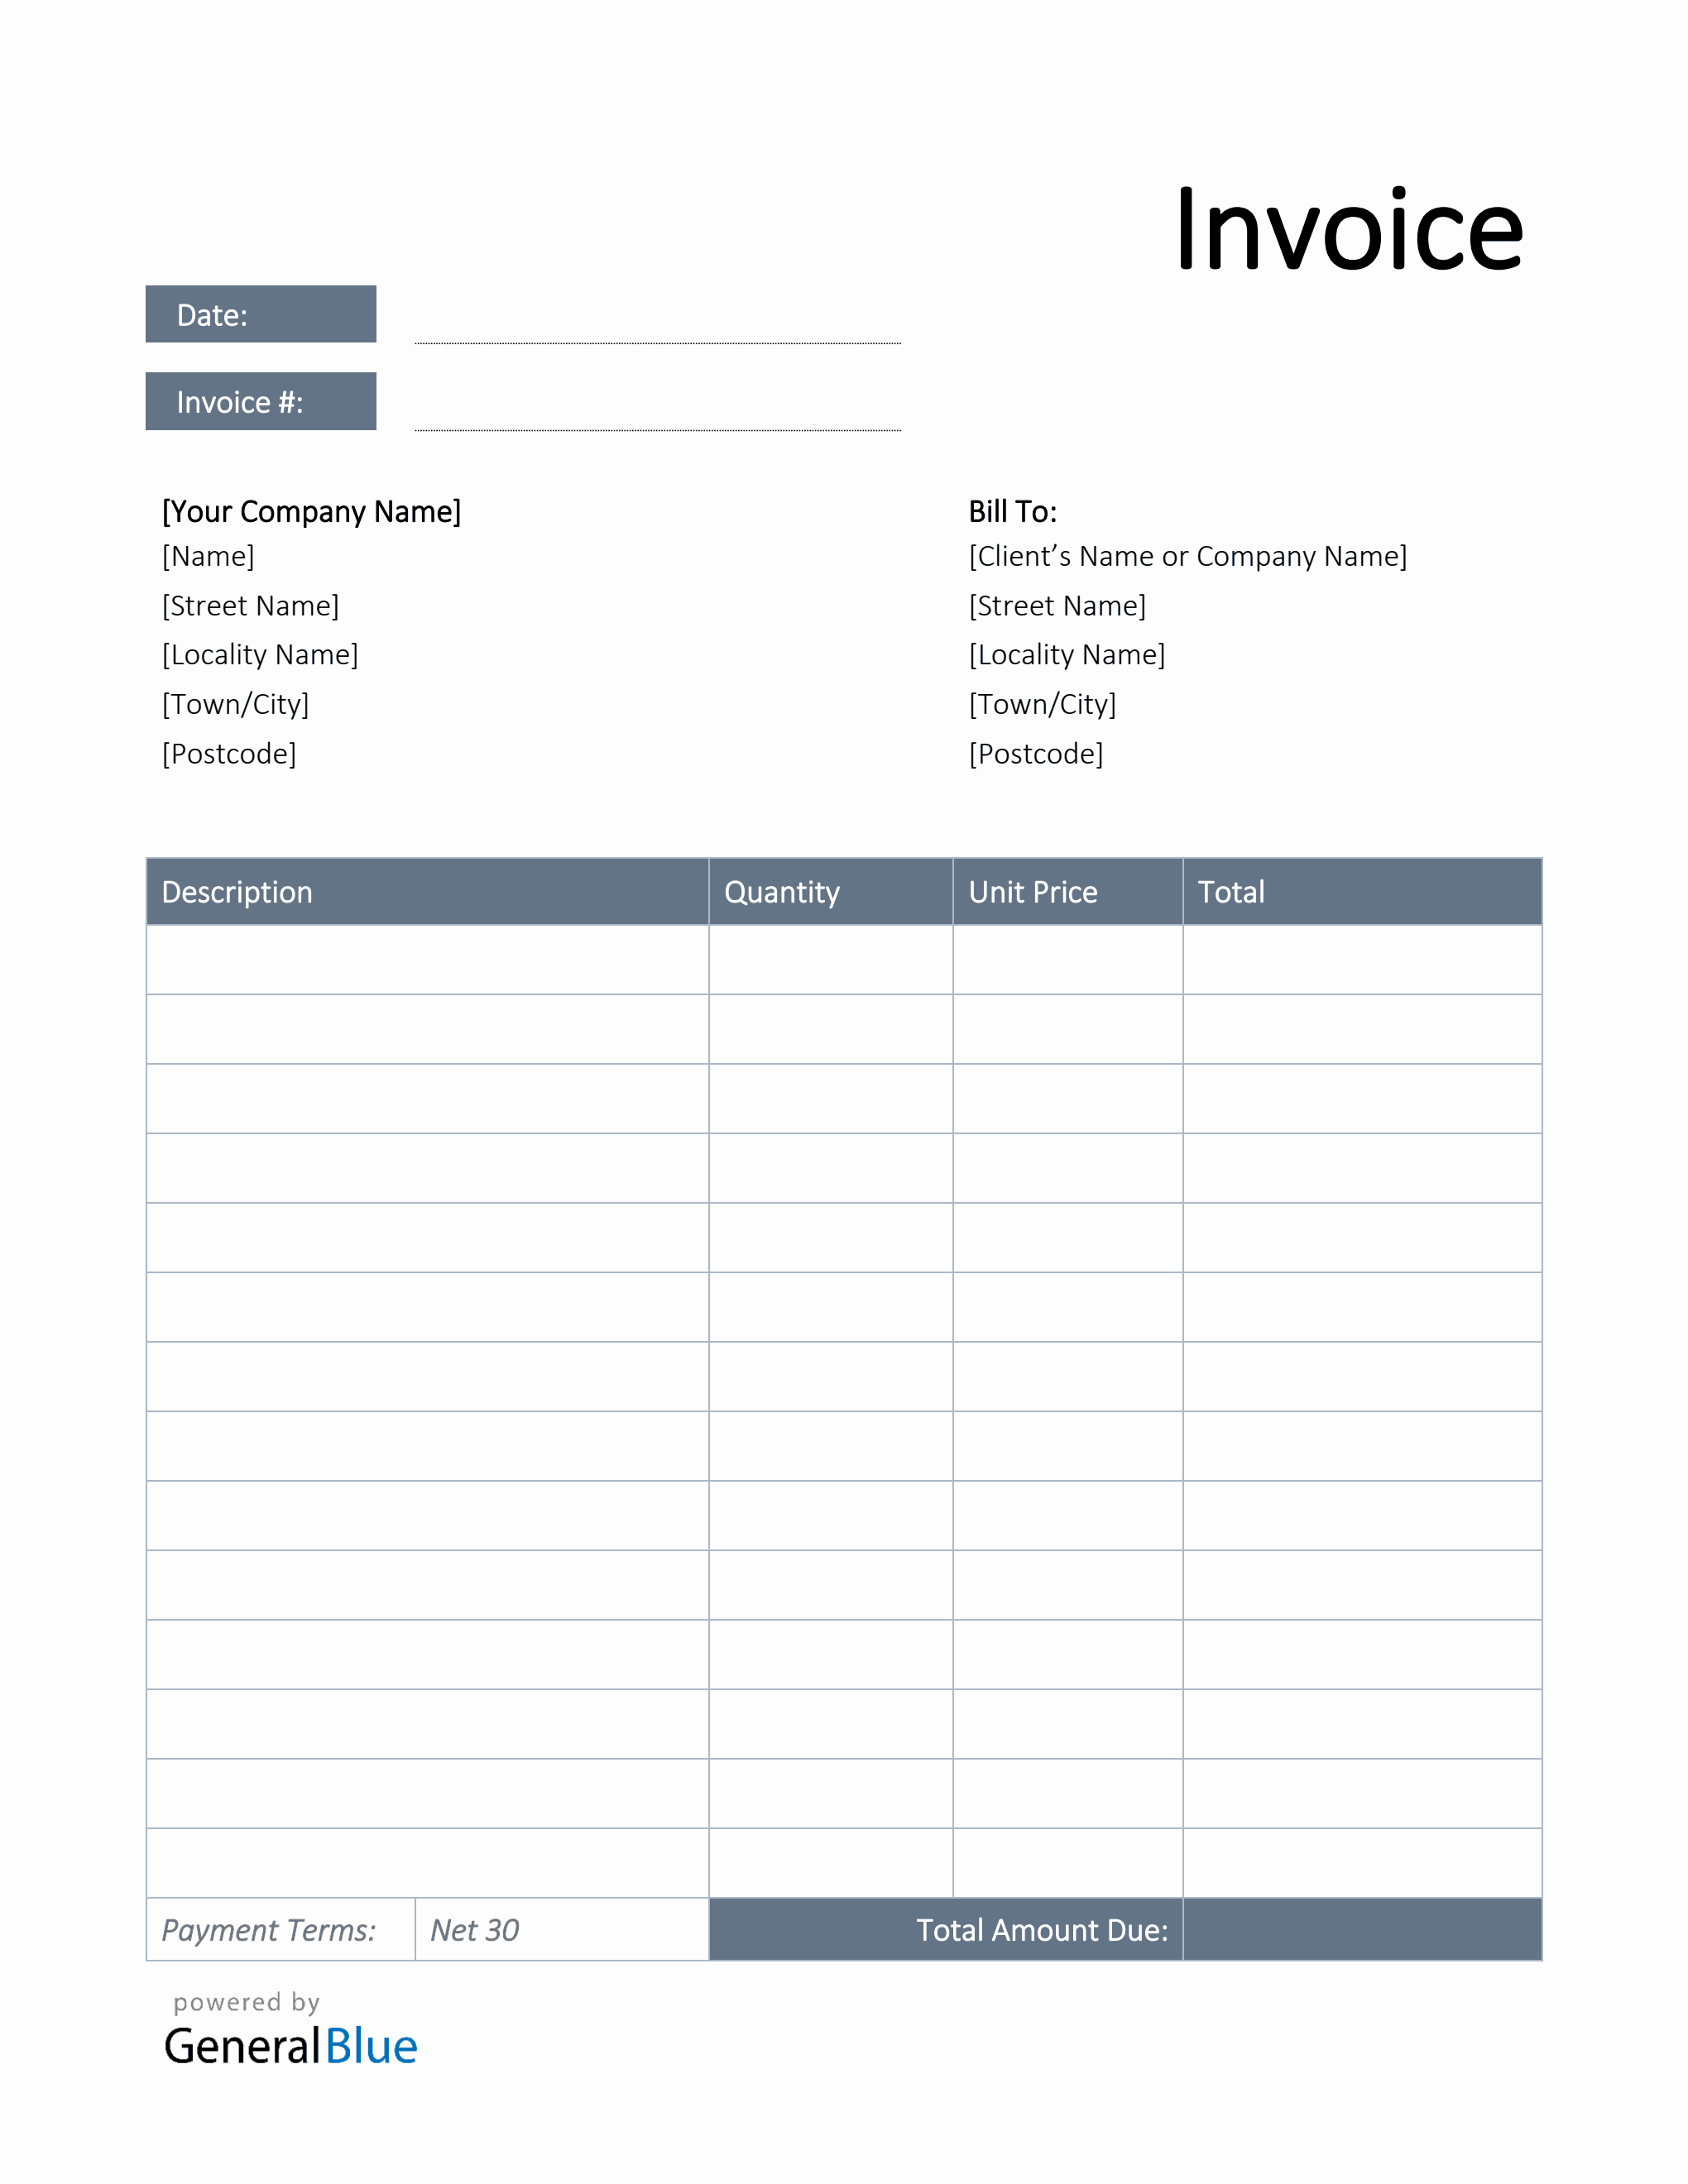 Invoice Template for U.K. in Word (Simple) For Business Invoice Template Uk